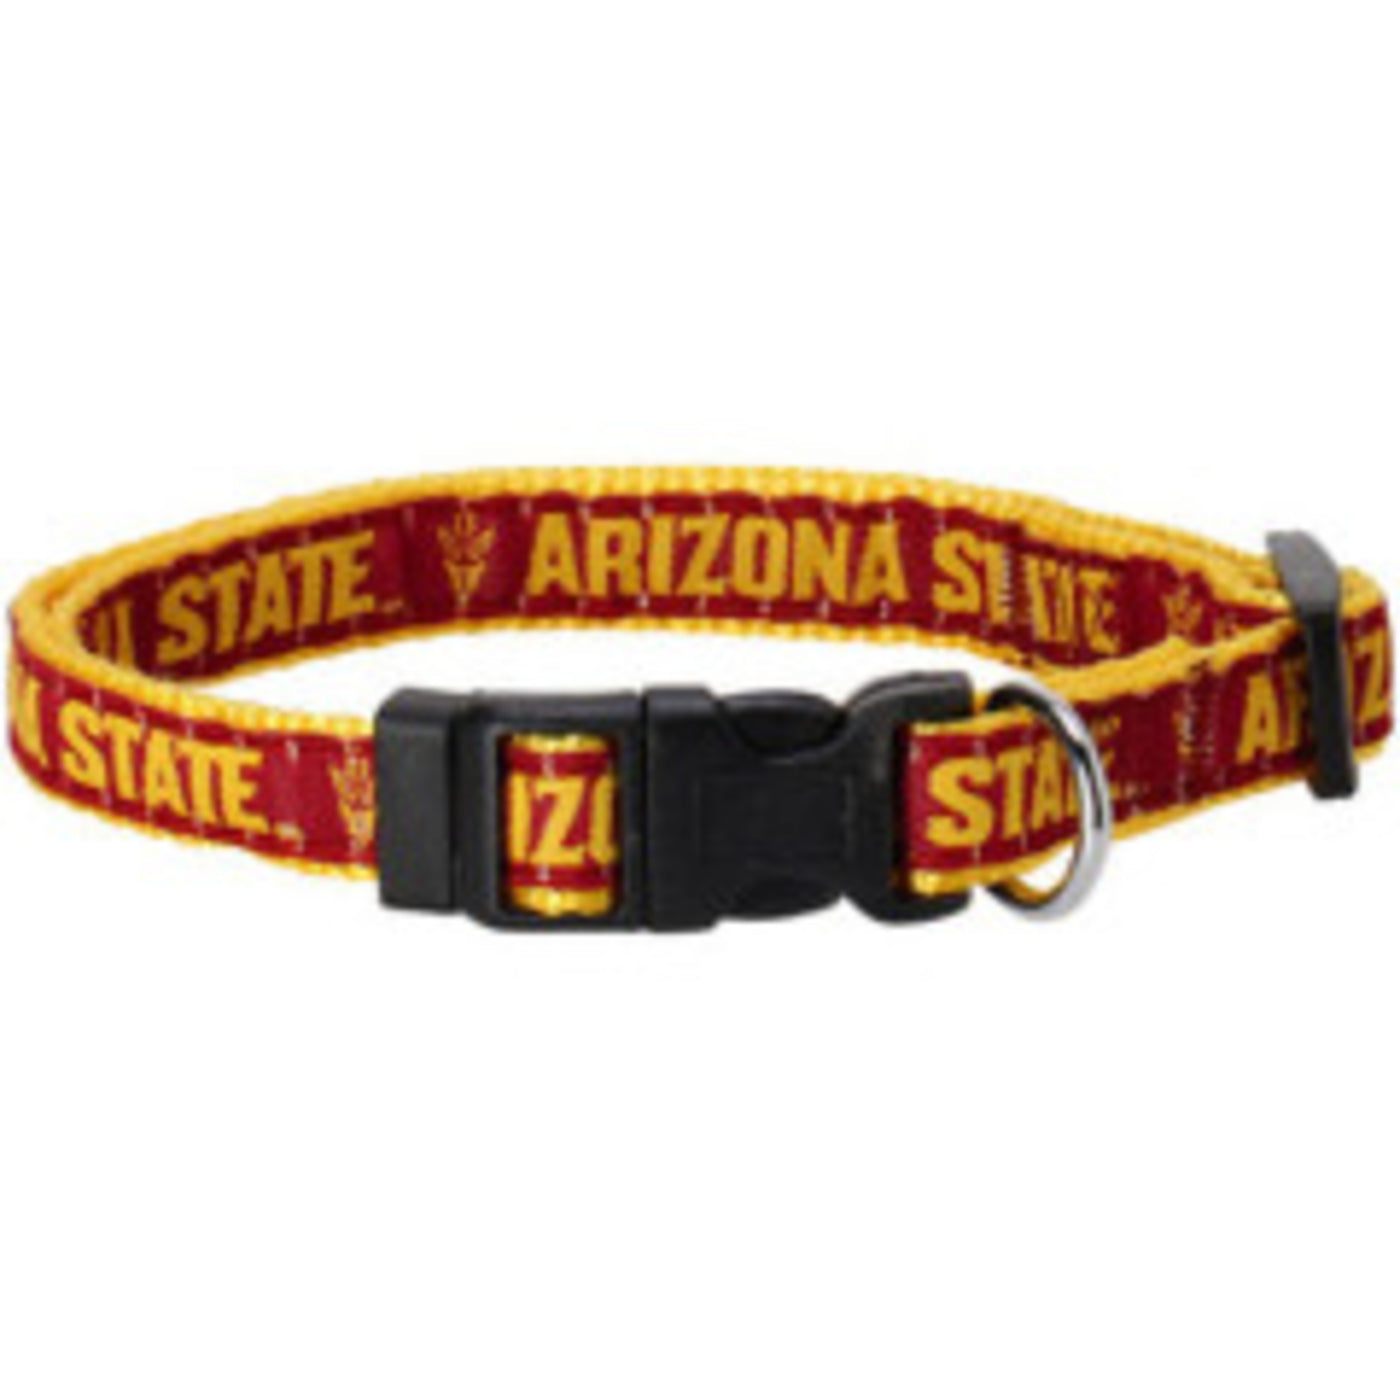 ASU maroon and gold dog collar with black buckle